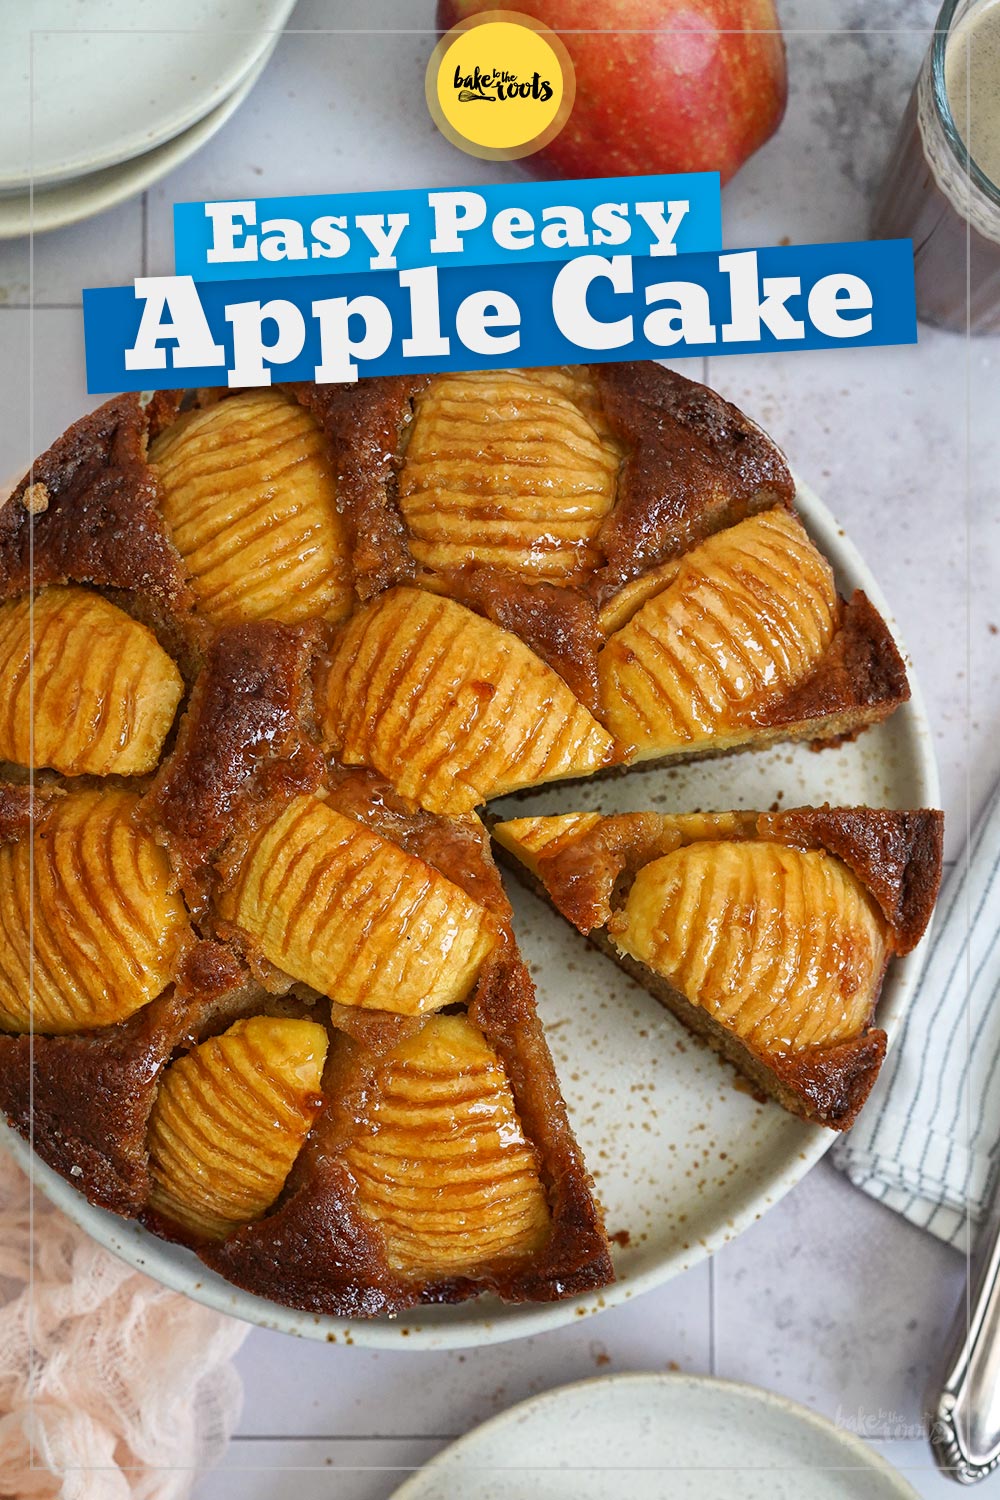 Easy-Peasy Apple Cake | Bake to the roots